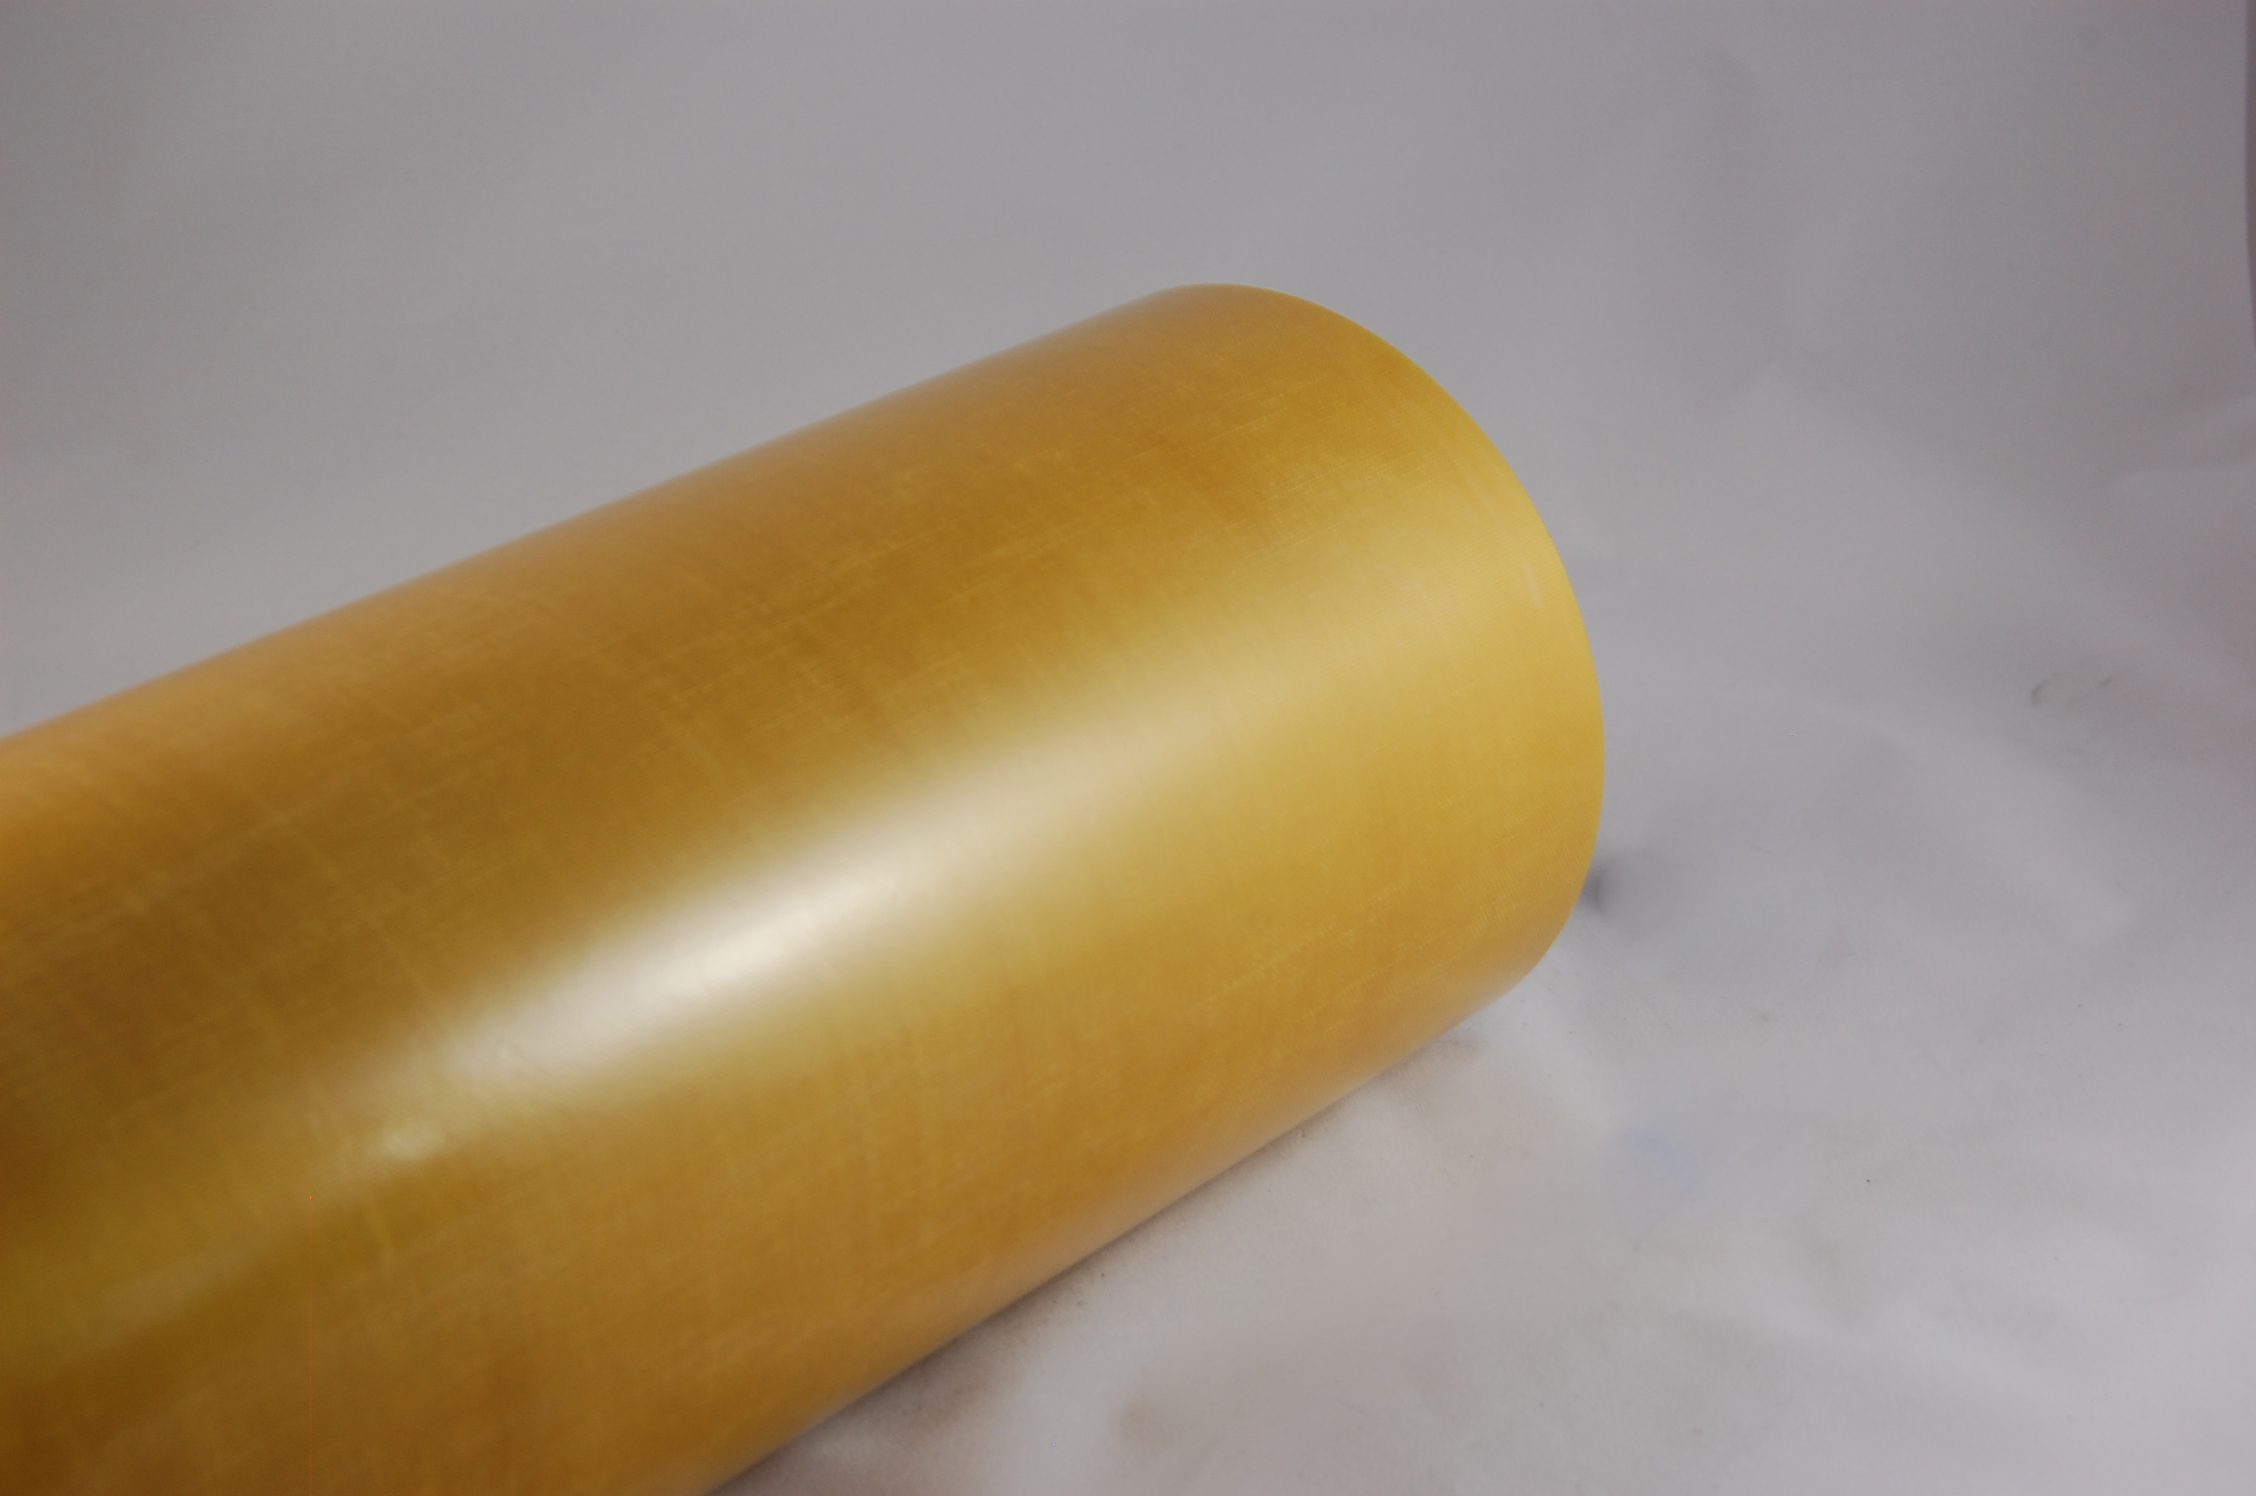 BDXTH07Y .007" thick Varnished Polyester Glass Flexible Fabric 180°C, yellow, 36" wide x  36 SY roll